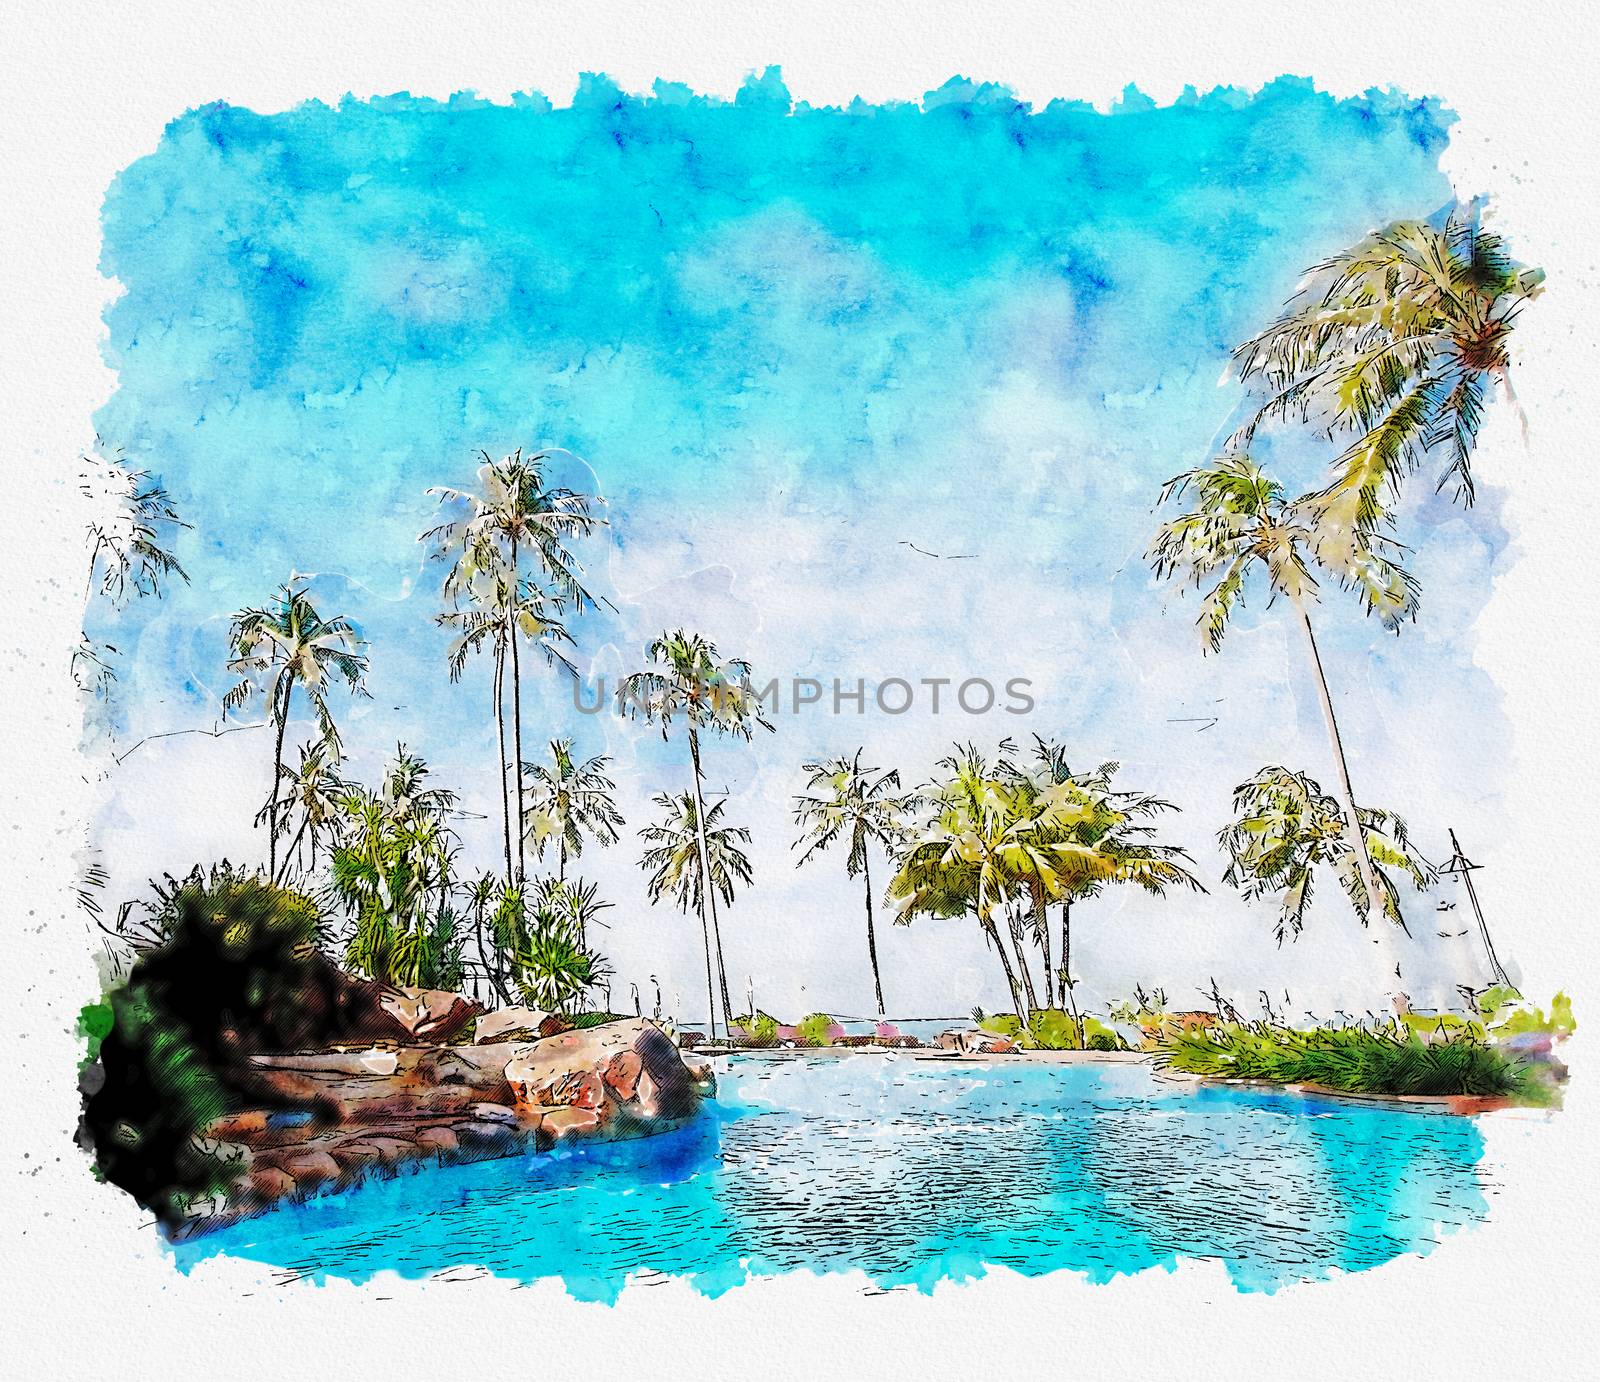 watercolor and illustration of tropical beach resort by pkproject